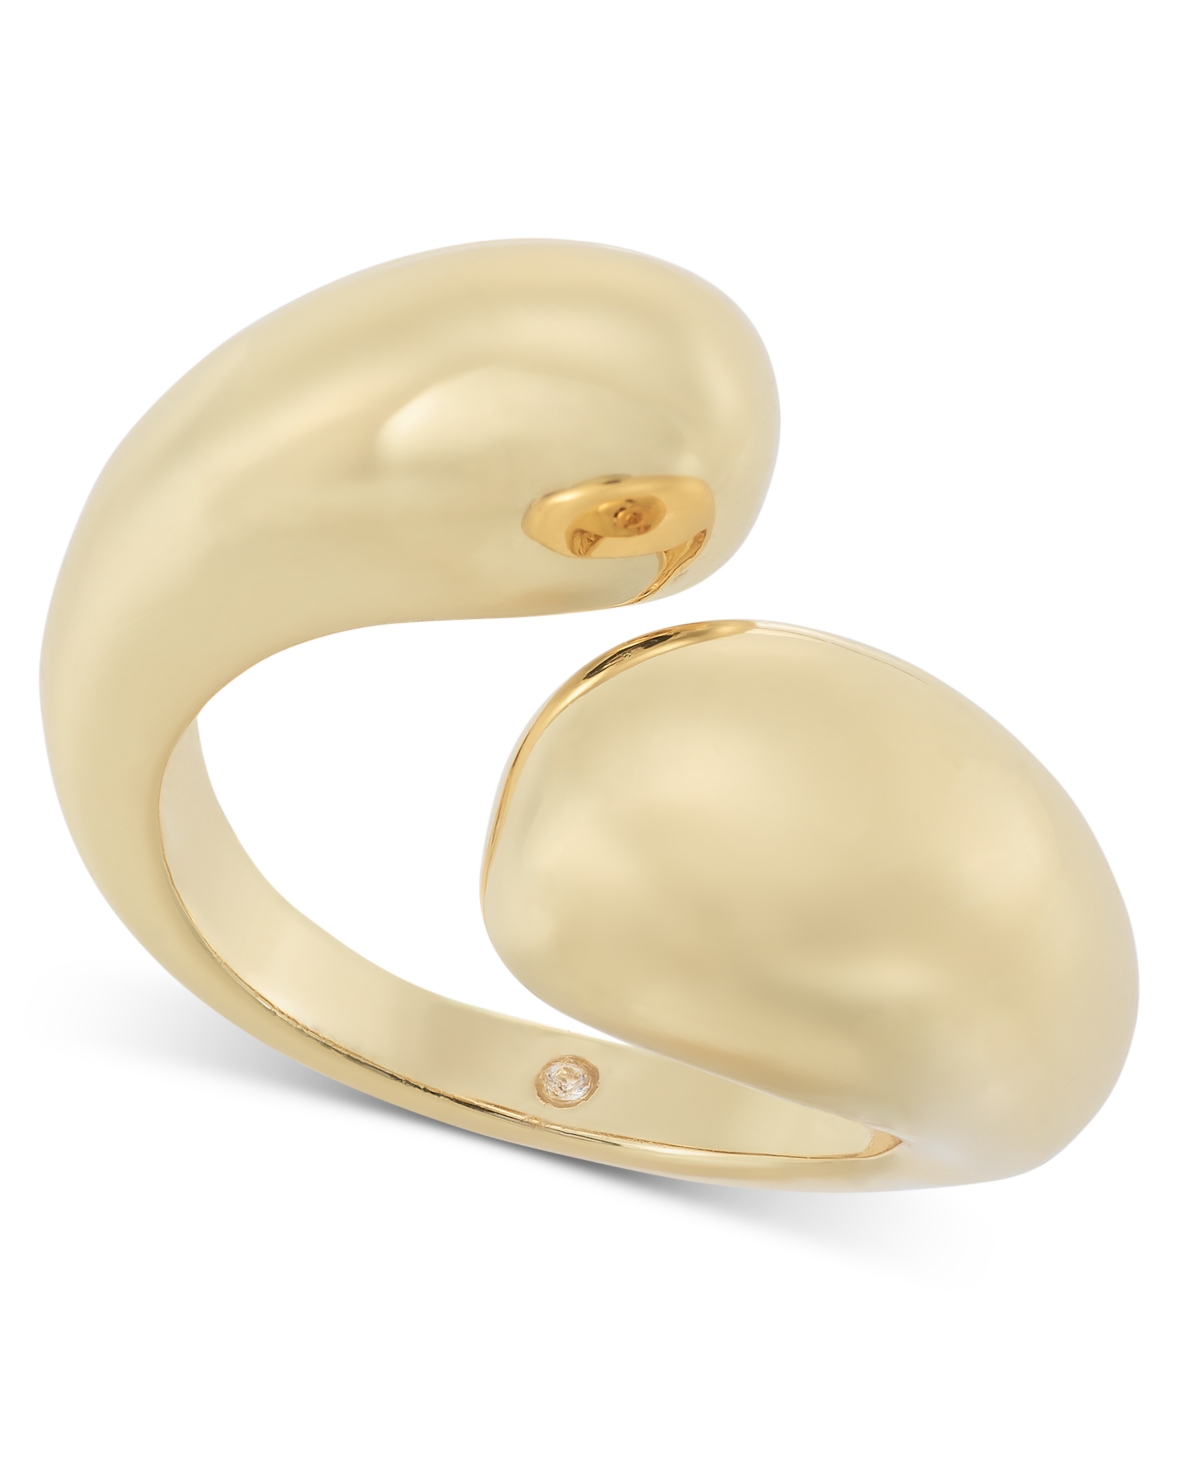 Gold-Tone Bypass Statement Ring, Created for Macy's - Gold